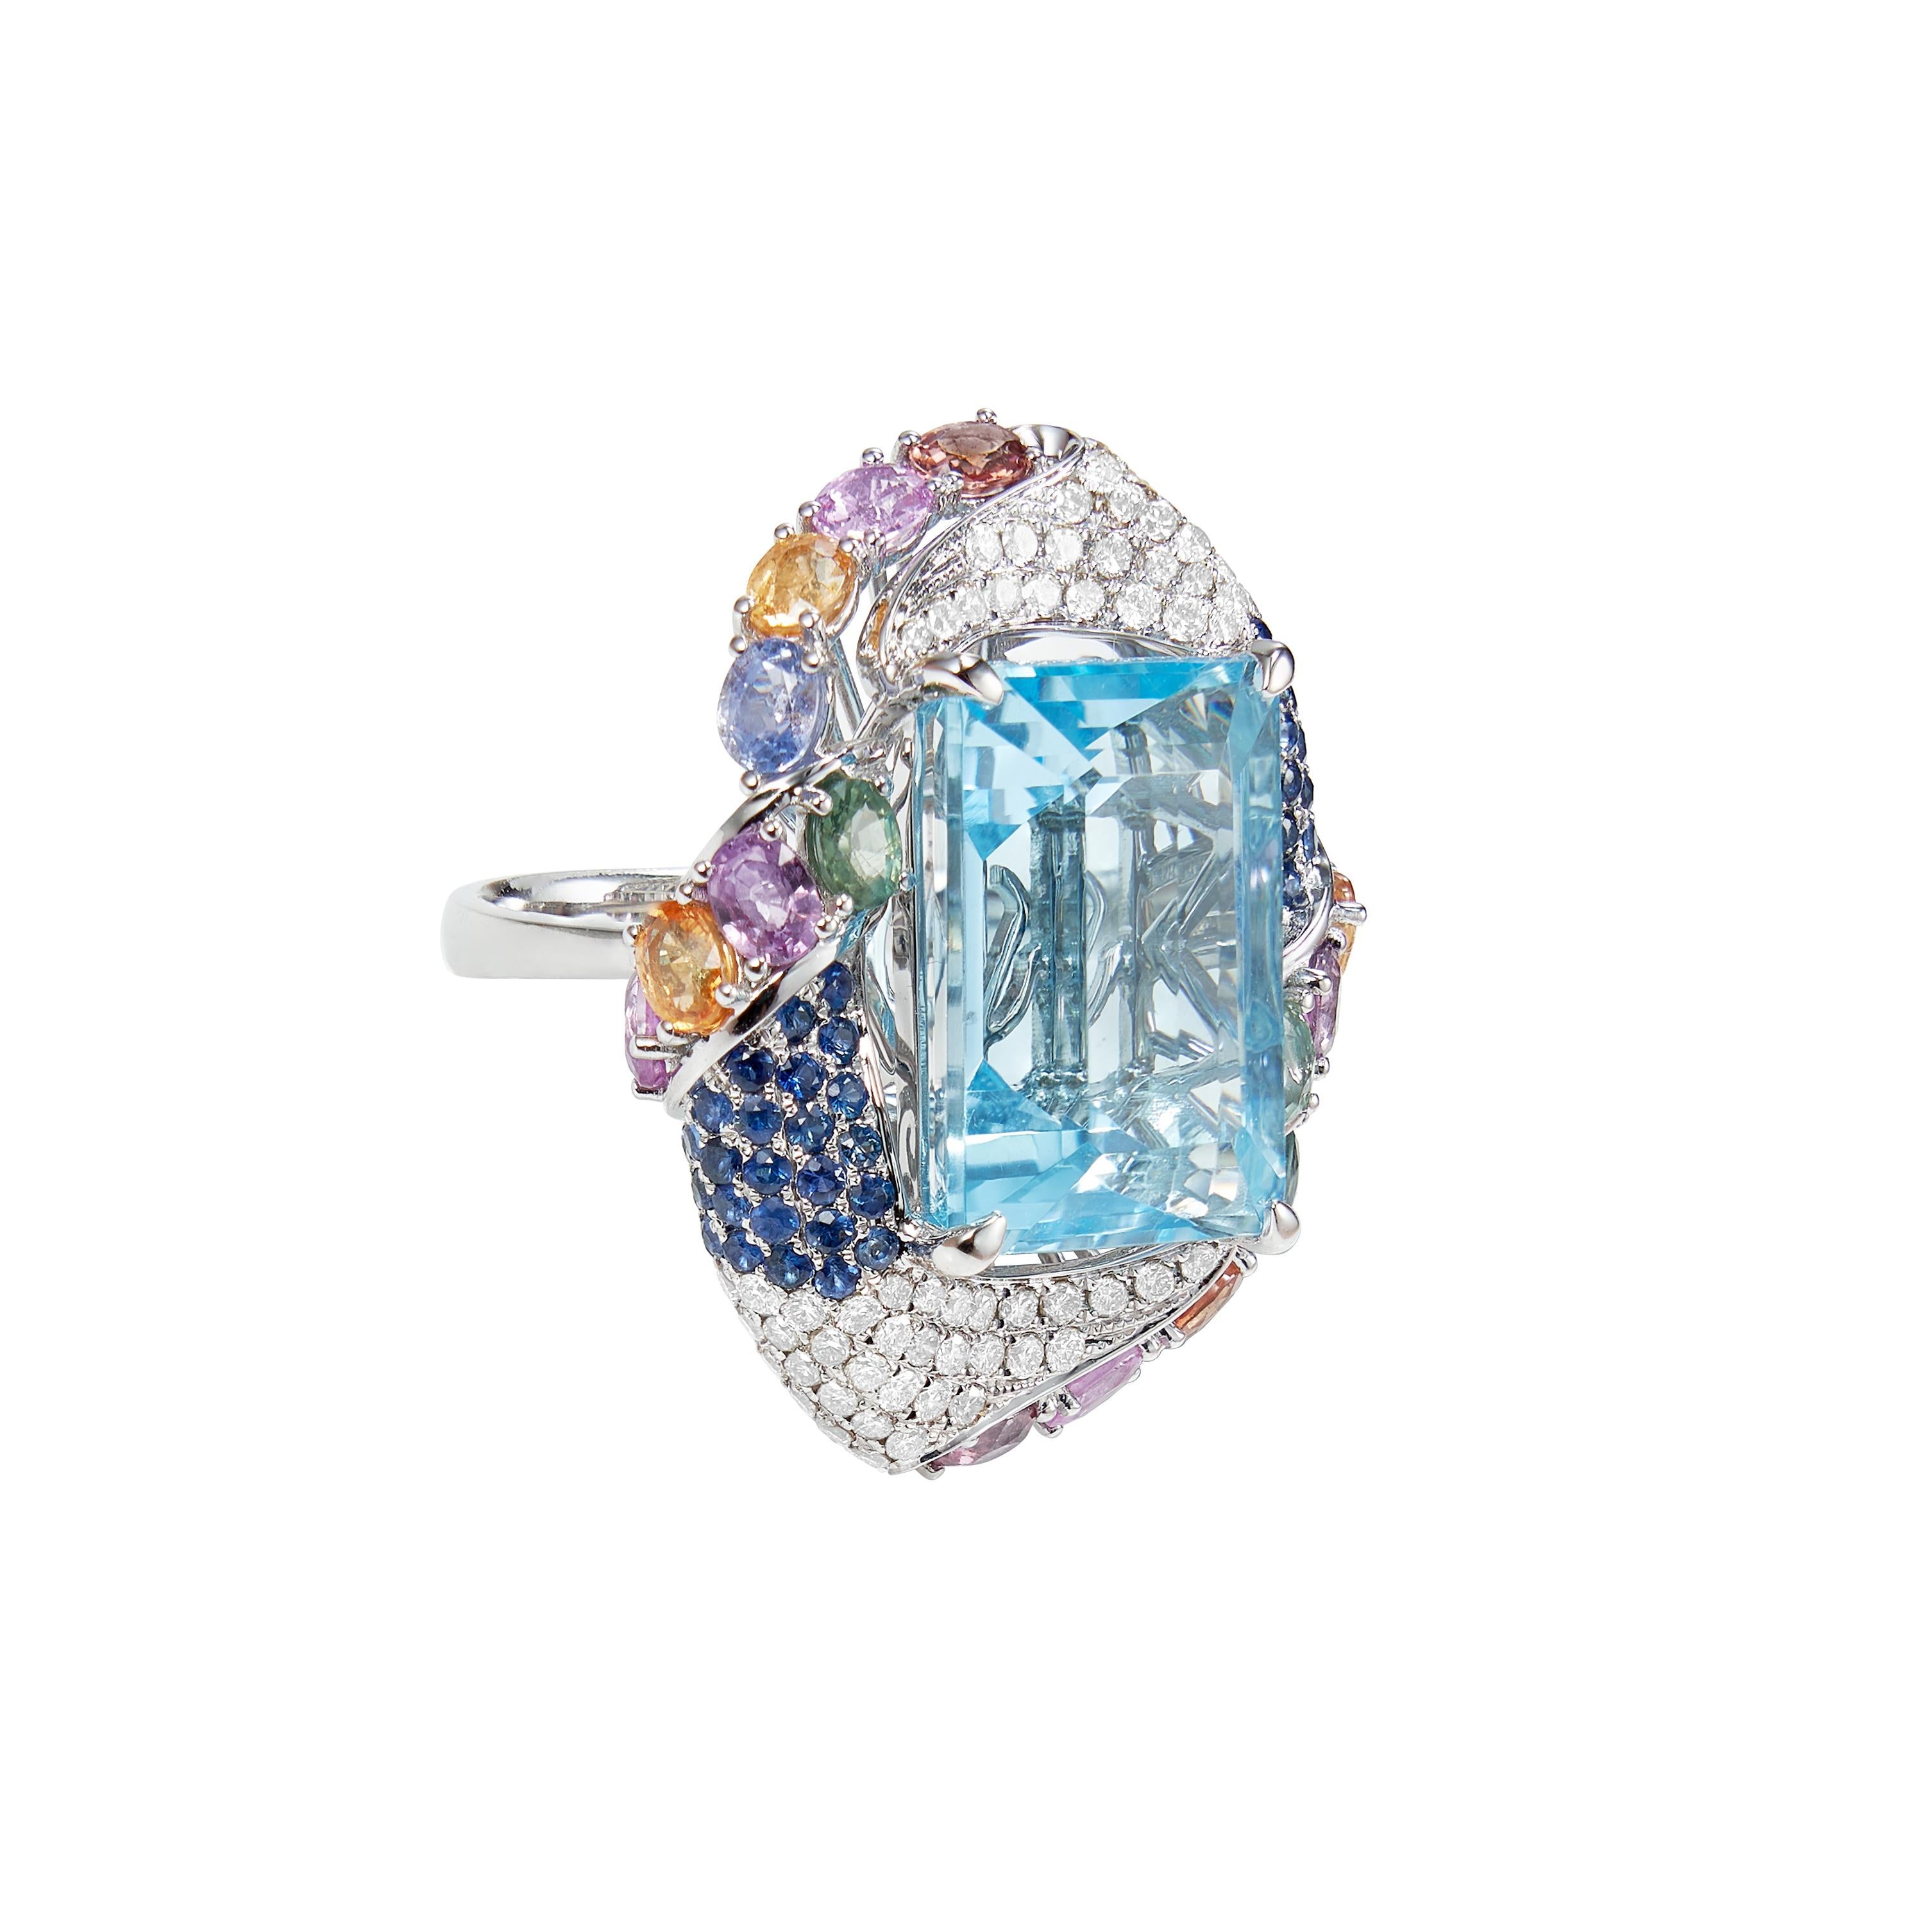 Sunita Nahata presents a collection of bold and colorful cocktail rings. This ring features a top mesmerizing sky blue topaz at the center, with blue sapphire, multi sapphires and diamonds radiating out onto the shrank of the ring.  

Sky Blue Topaz